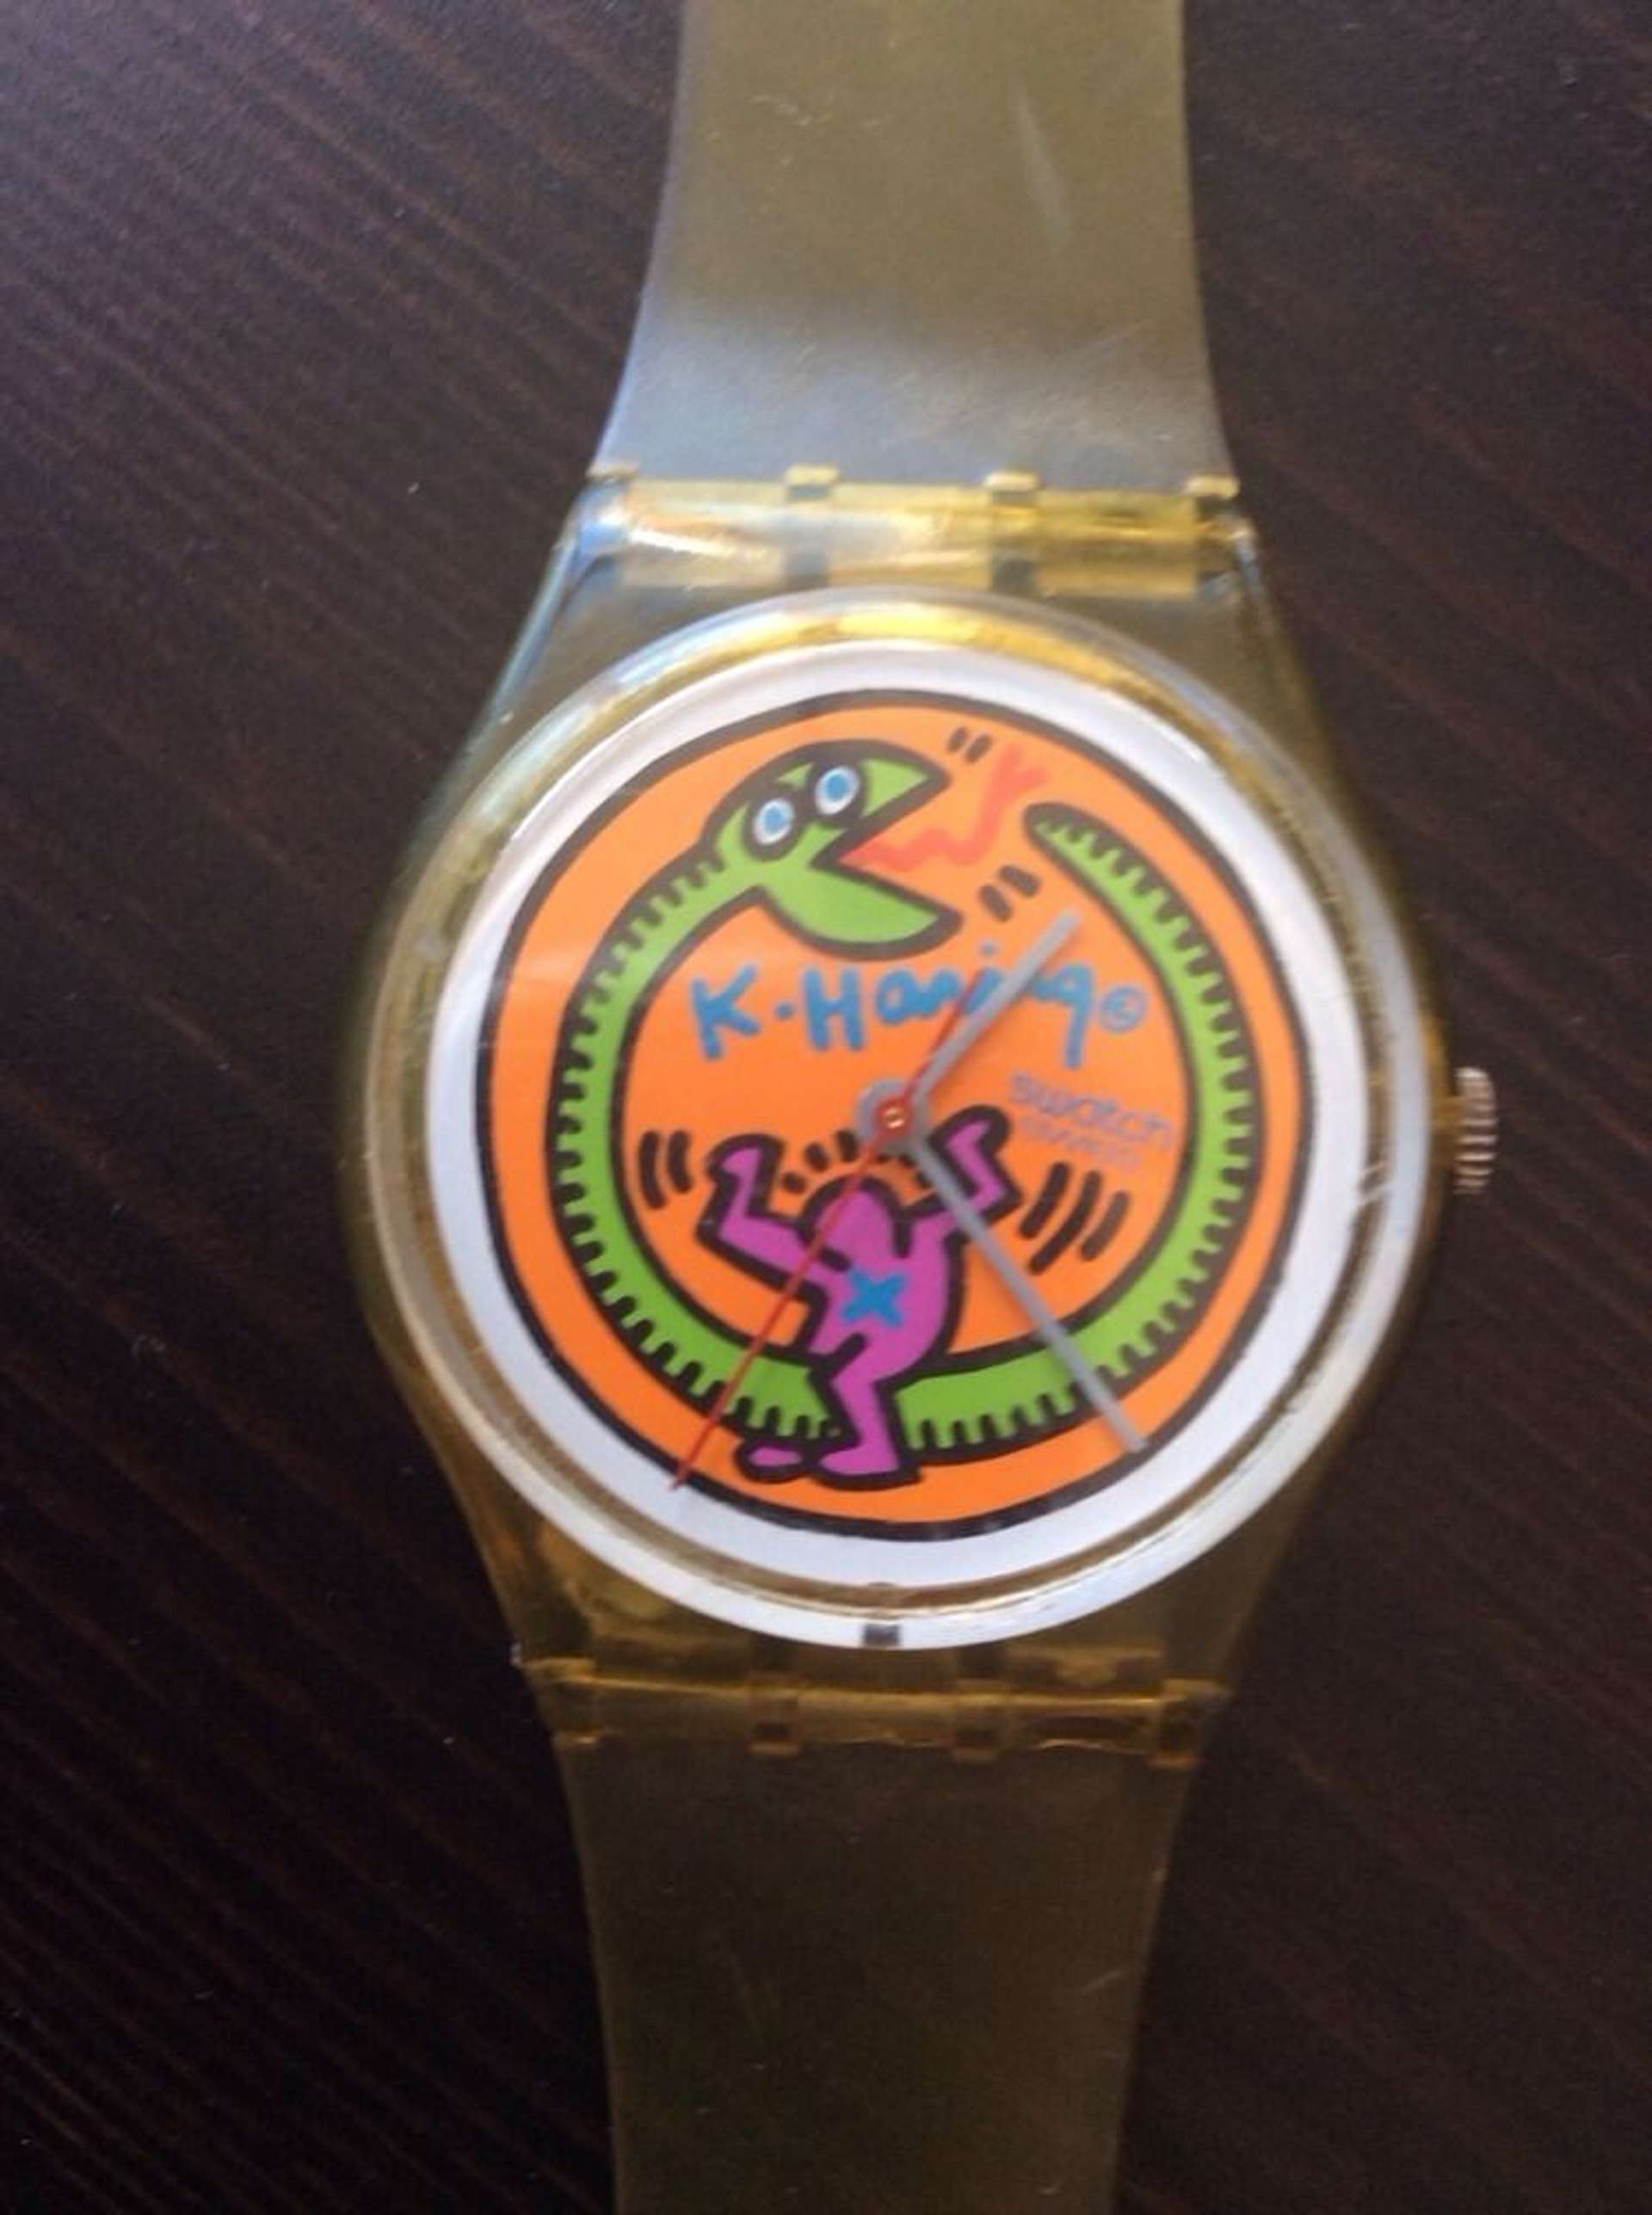 A Swatch watch with a design by Keith Haring on the watch face, showing a small purple figure on a green snake